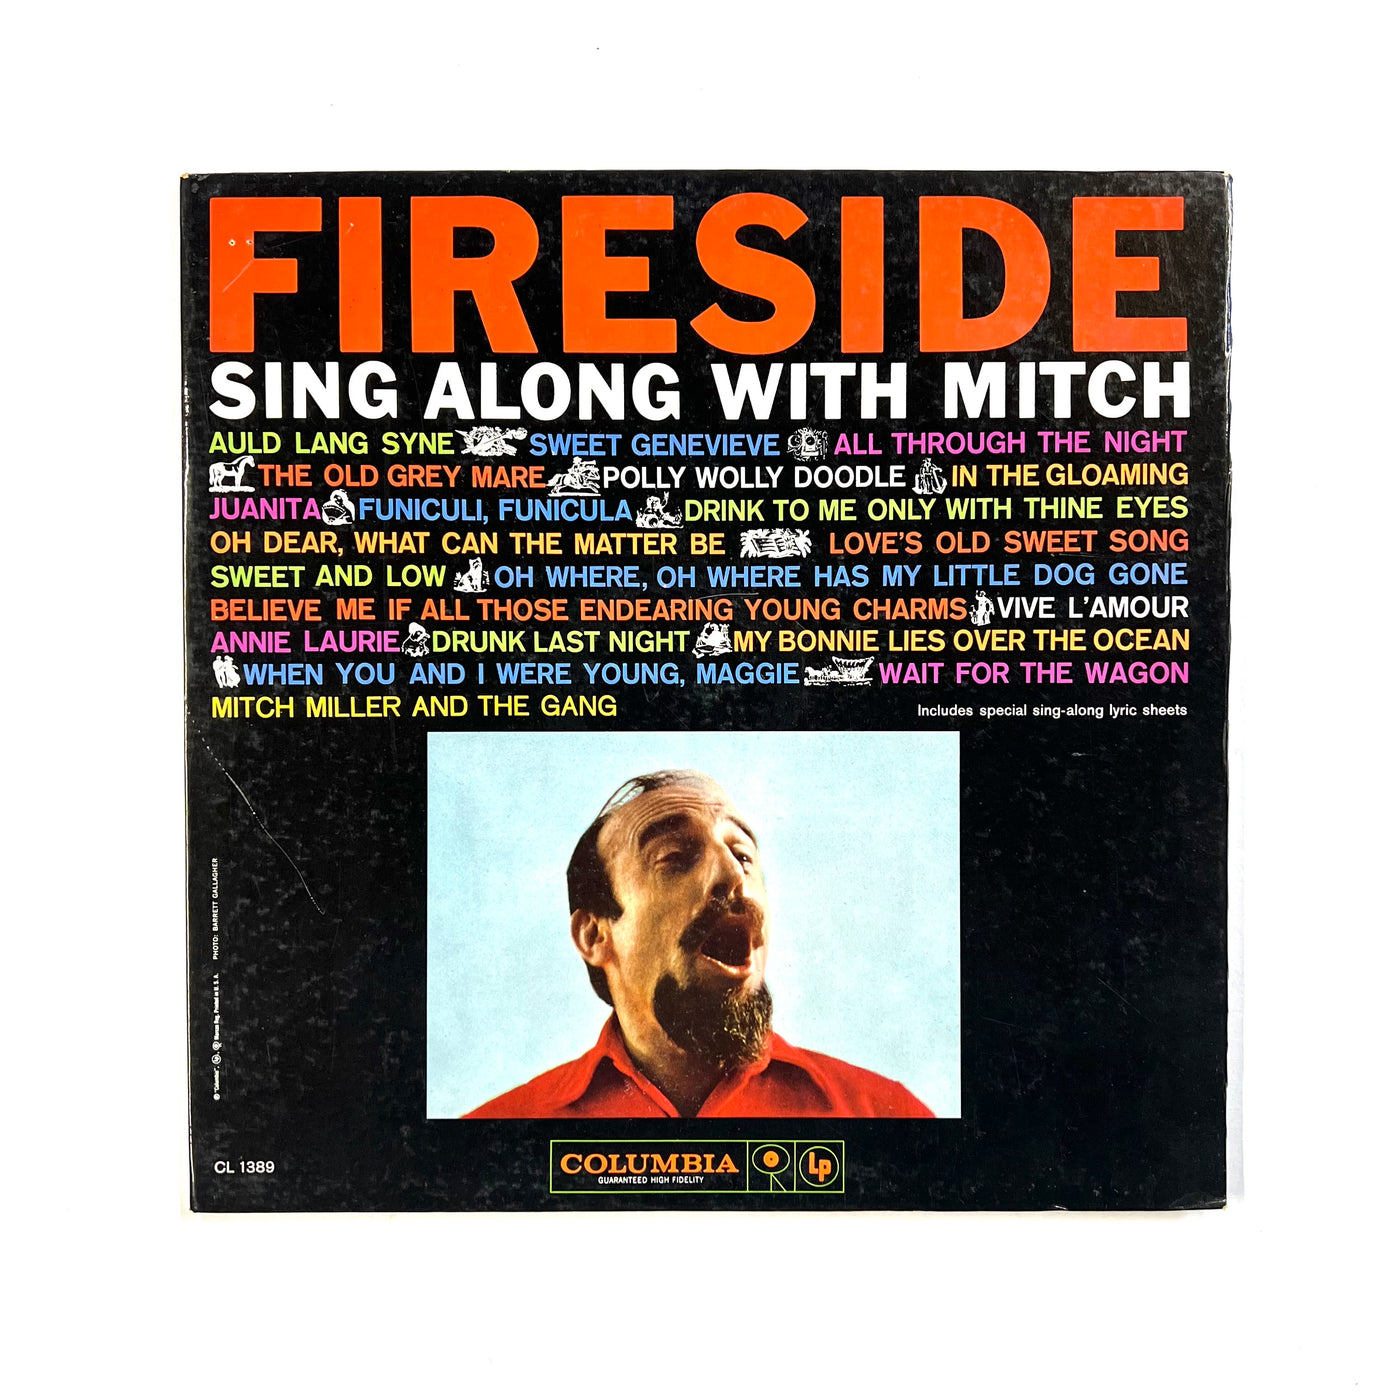 Mitch Miller And The Gang - Fireside Sing Along With Mitch